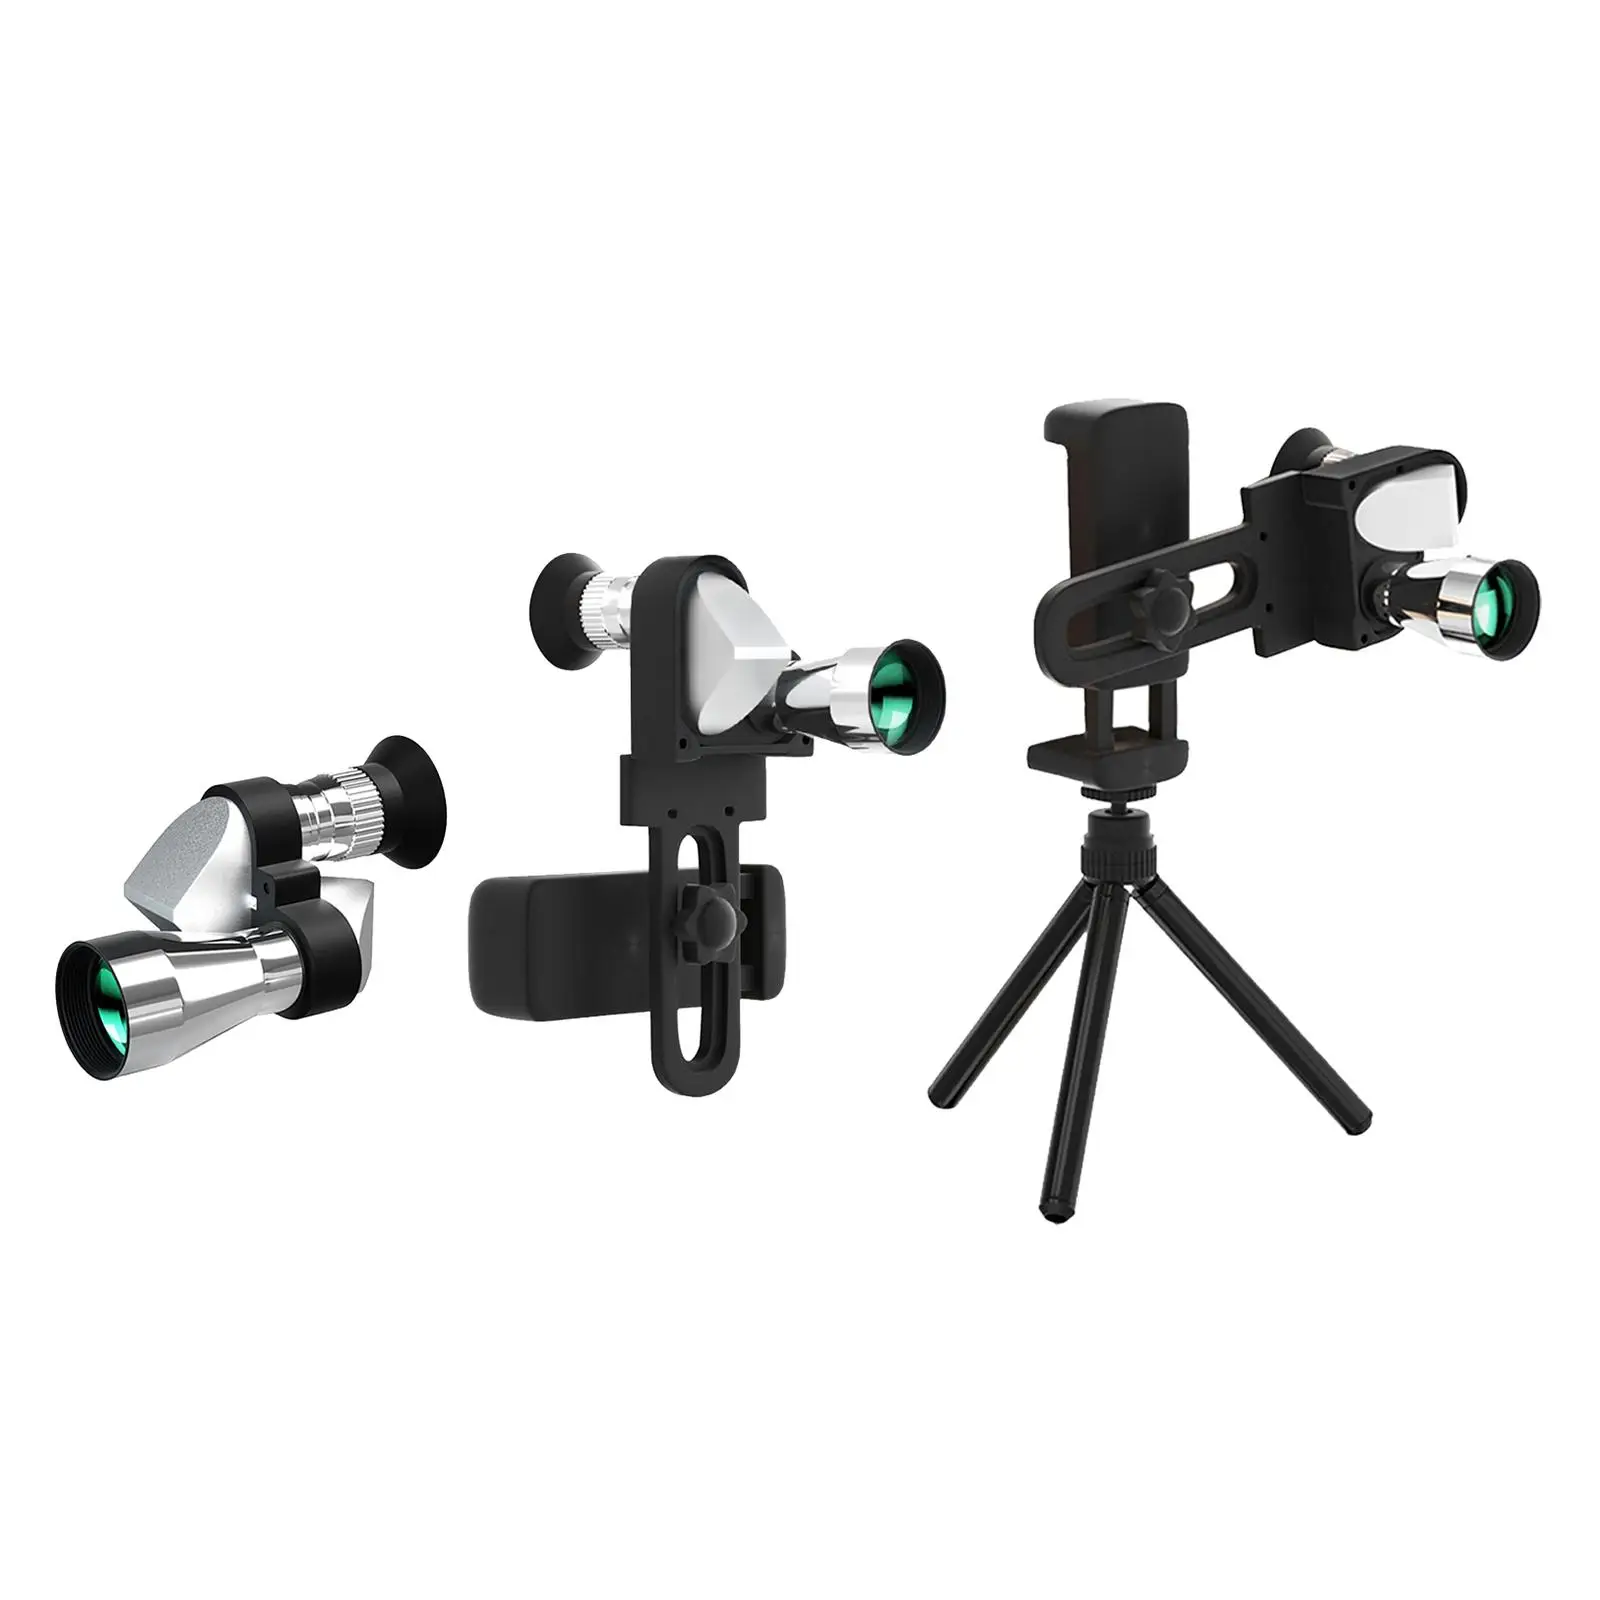 Pocket Outdoor Portable Telescope for Birdwatching Fishing Scenery